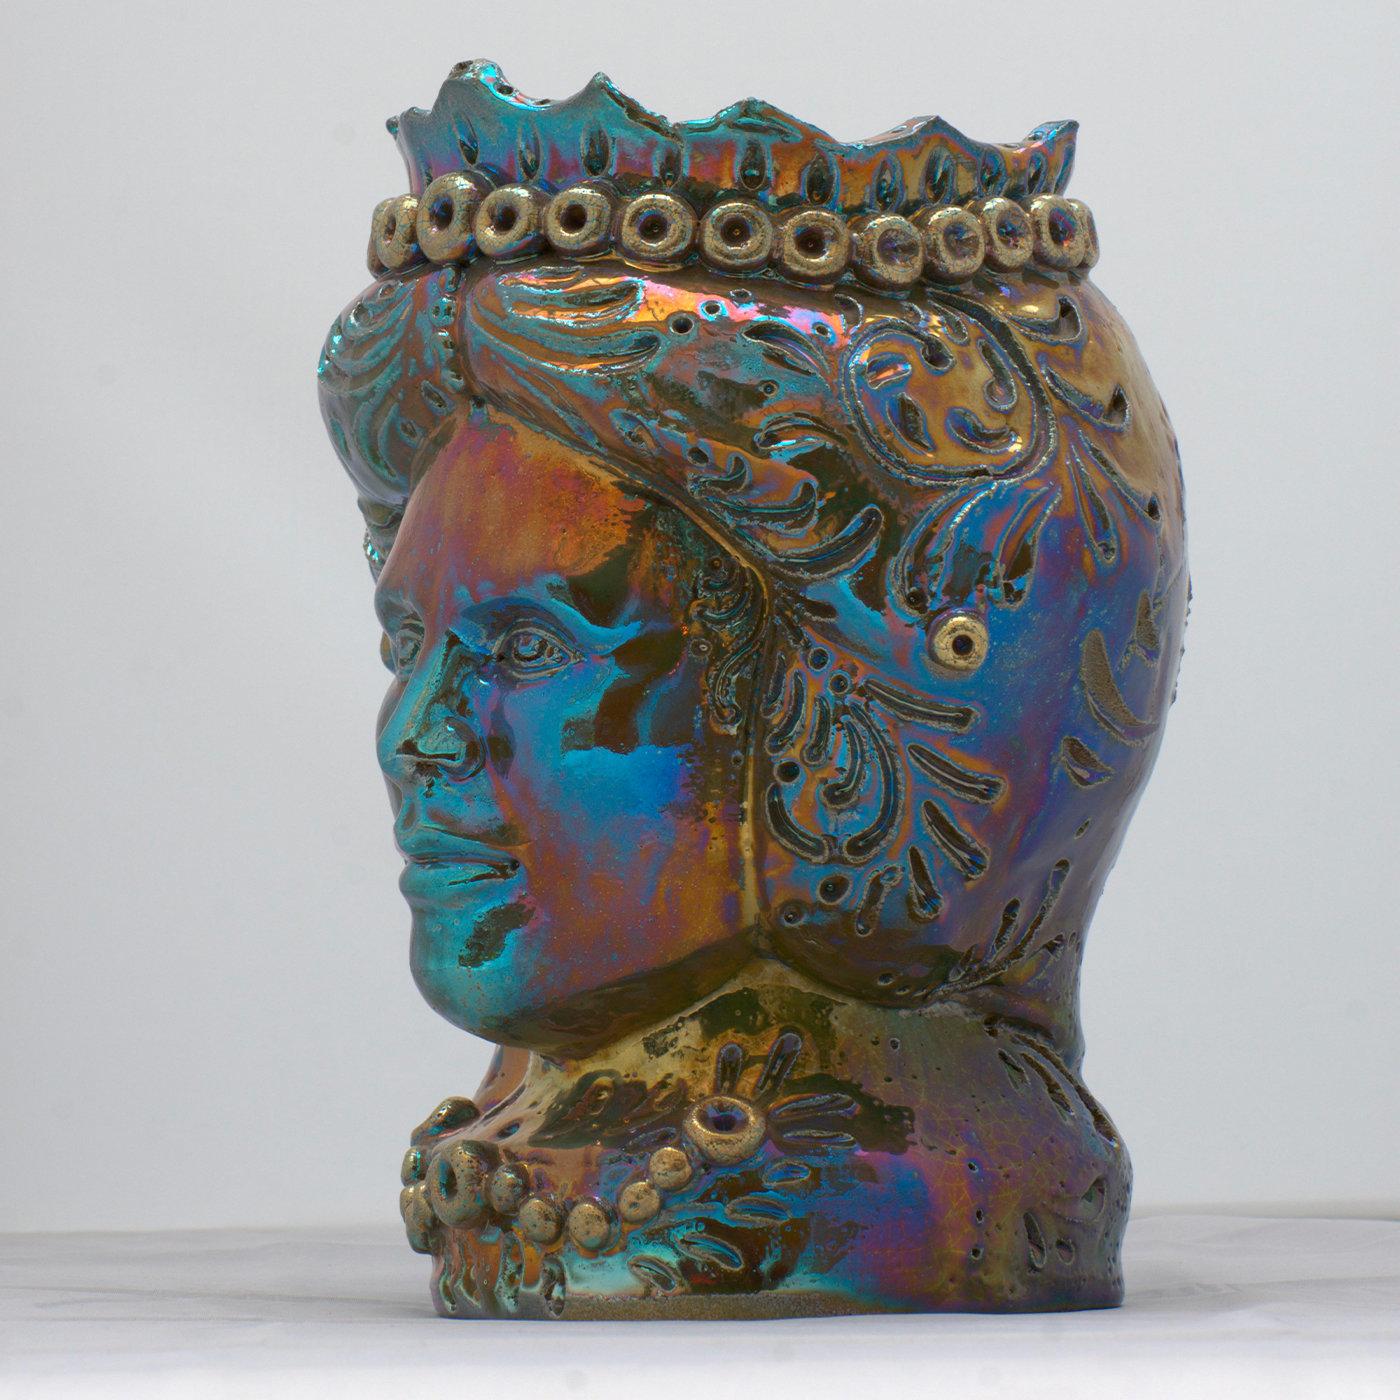 Visually captivating in its mesmerizing use of colors, this gorgeous sculpture is named after the Italian word for 